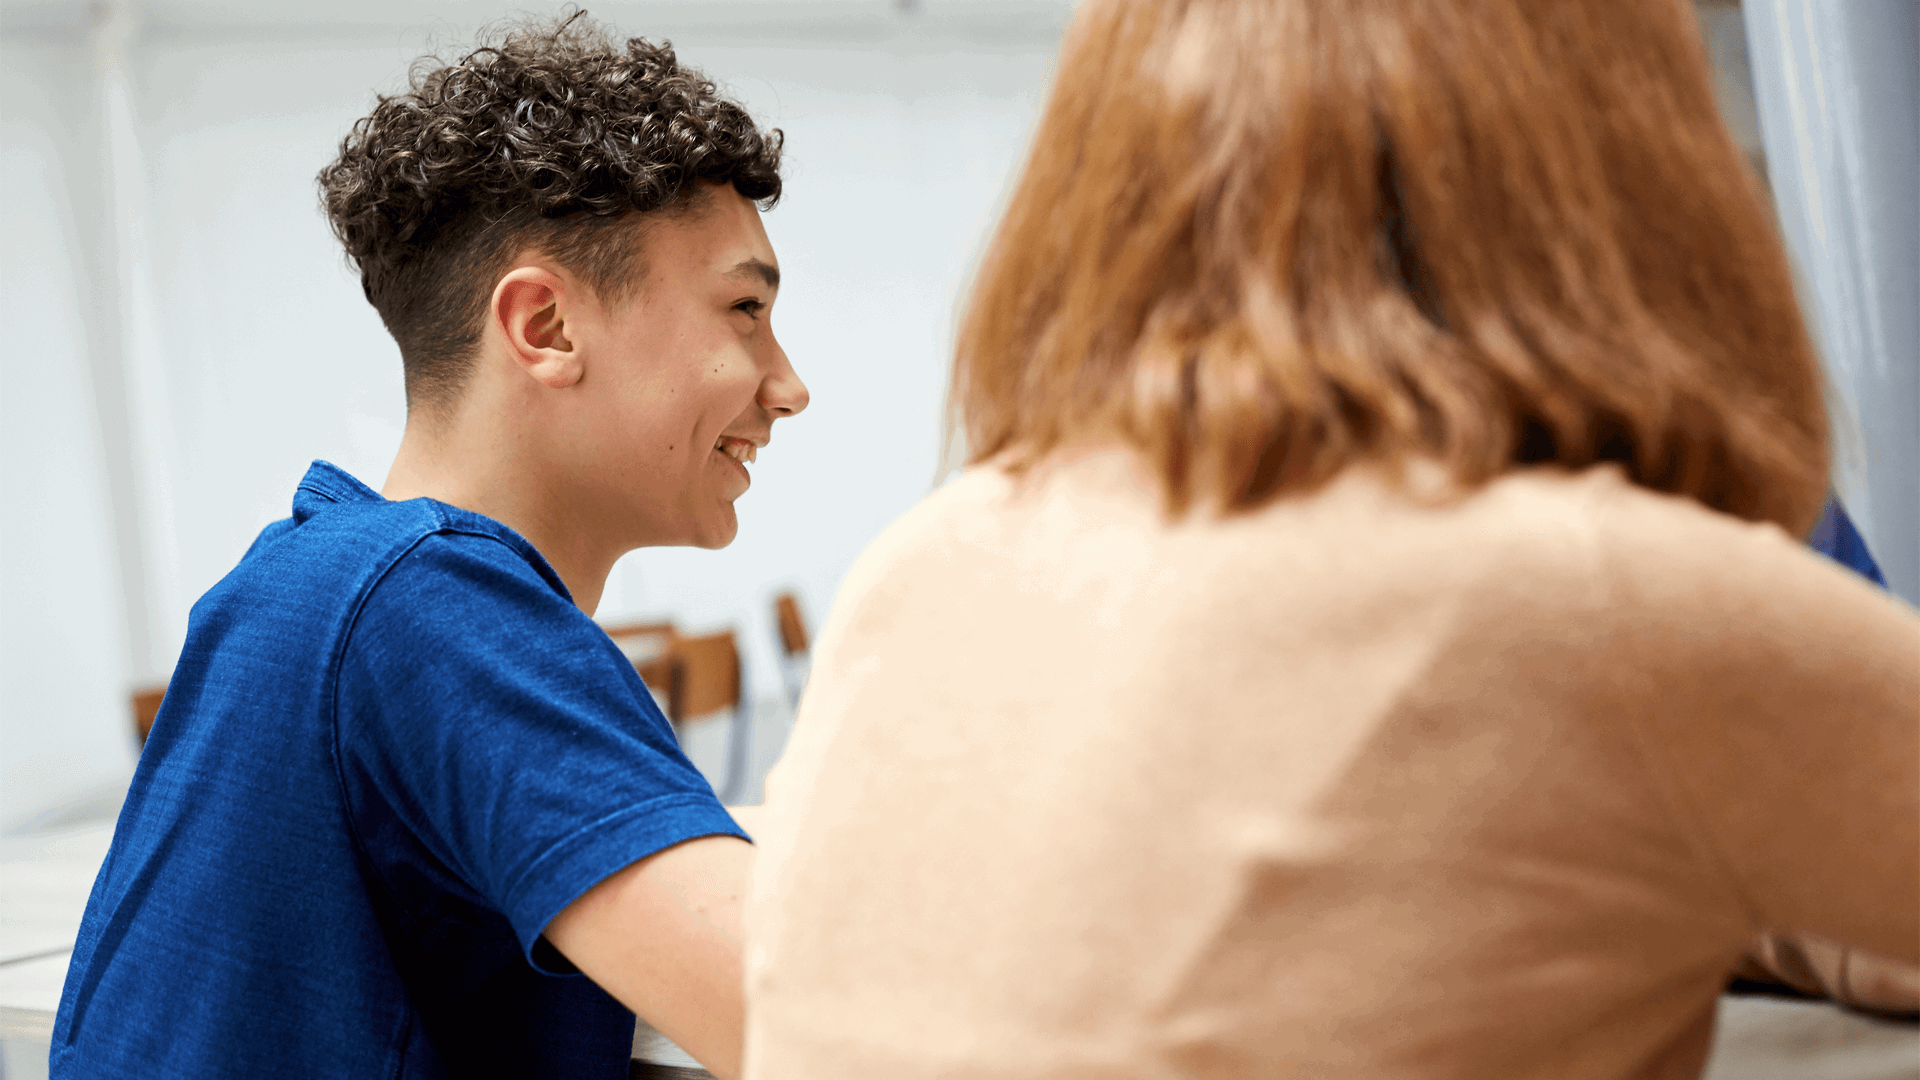 backshot-of-a-boy-with-short-curly-hair-and-wearing-blue-shirt-laughing-beside-a-girl-wearing-beige-shirt-with-face-unseen-while-inside-a-classroom